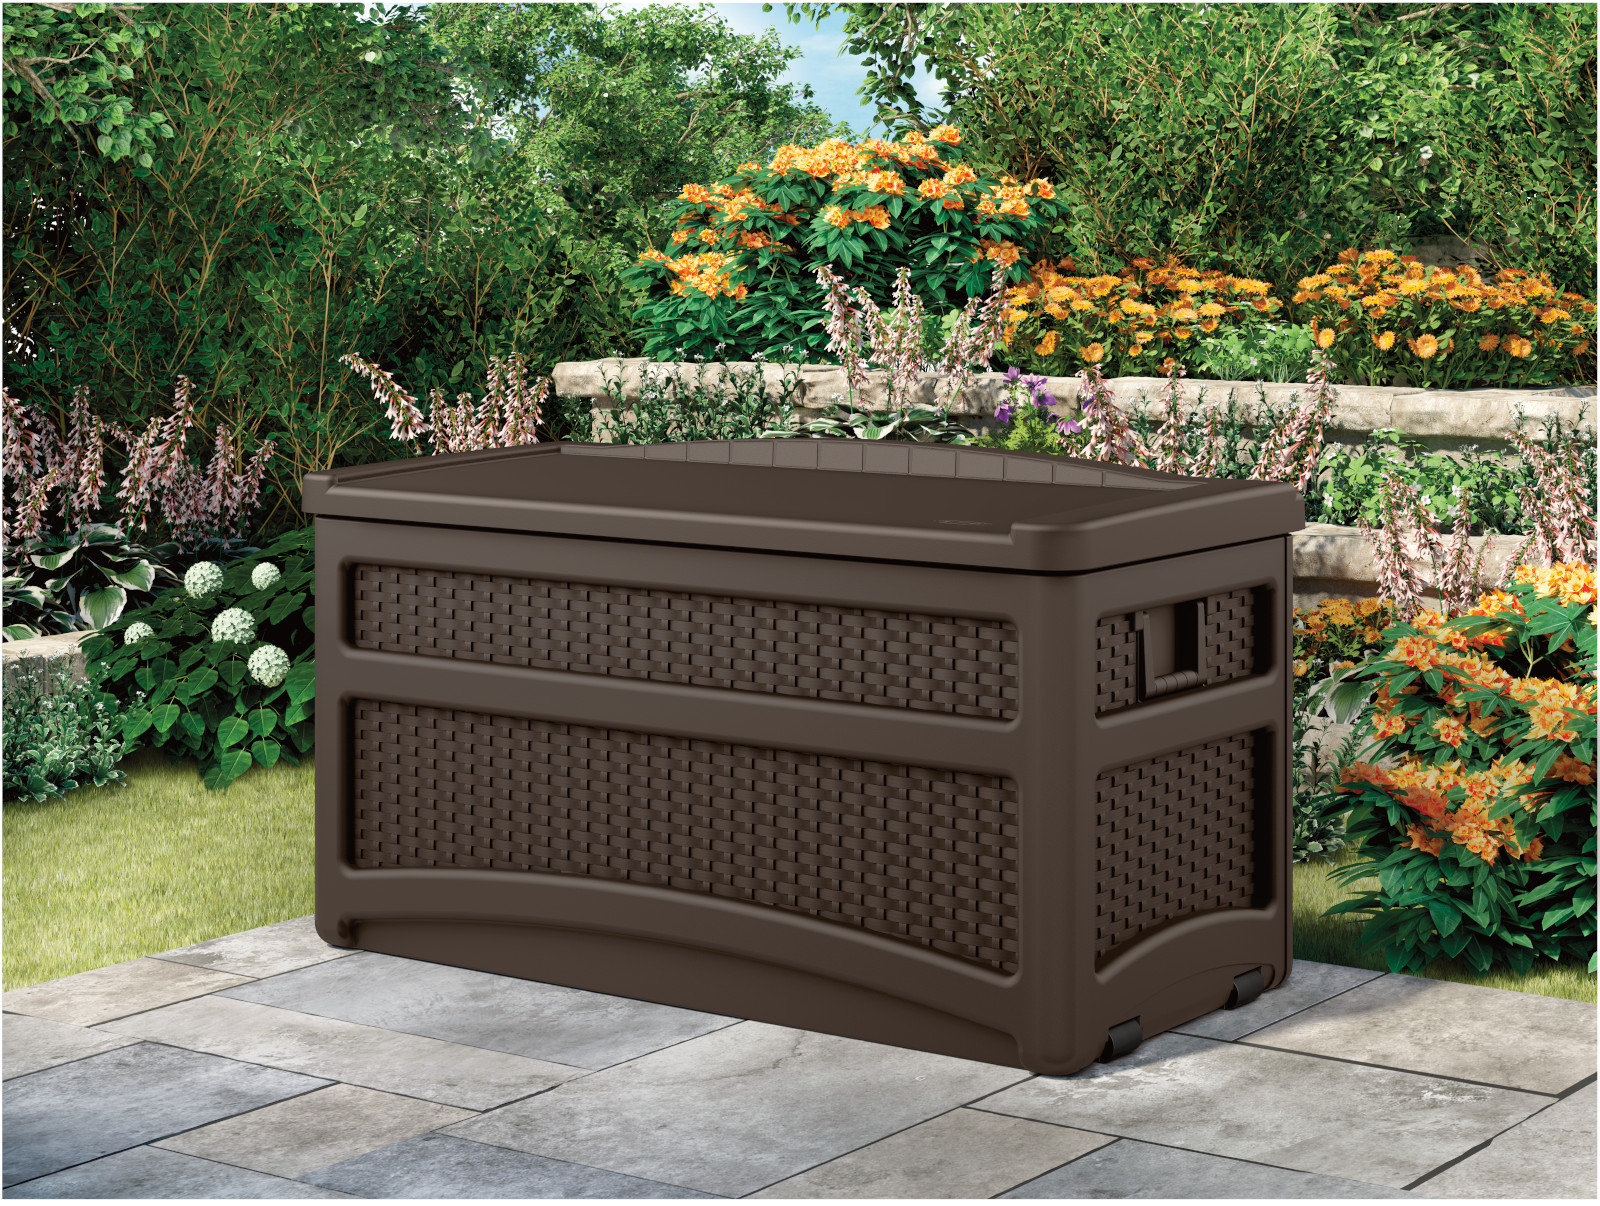 Suncast DBW7500 73 Gallon Outdoor Patio Storage Chest with Handles & Seat, Resin, Java, 39 lb, (L x W x H) 23.75 x 22.5 x 46 inches - image 5 of 7